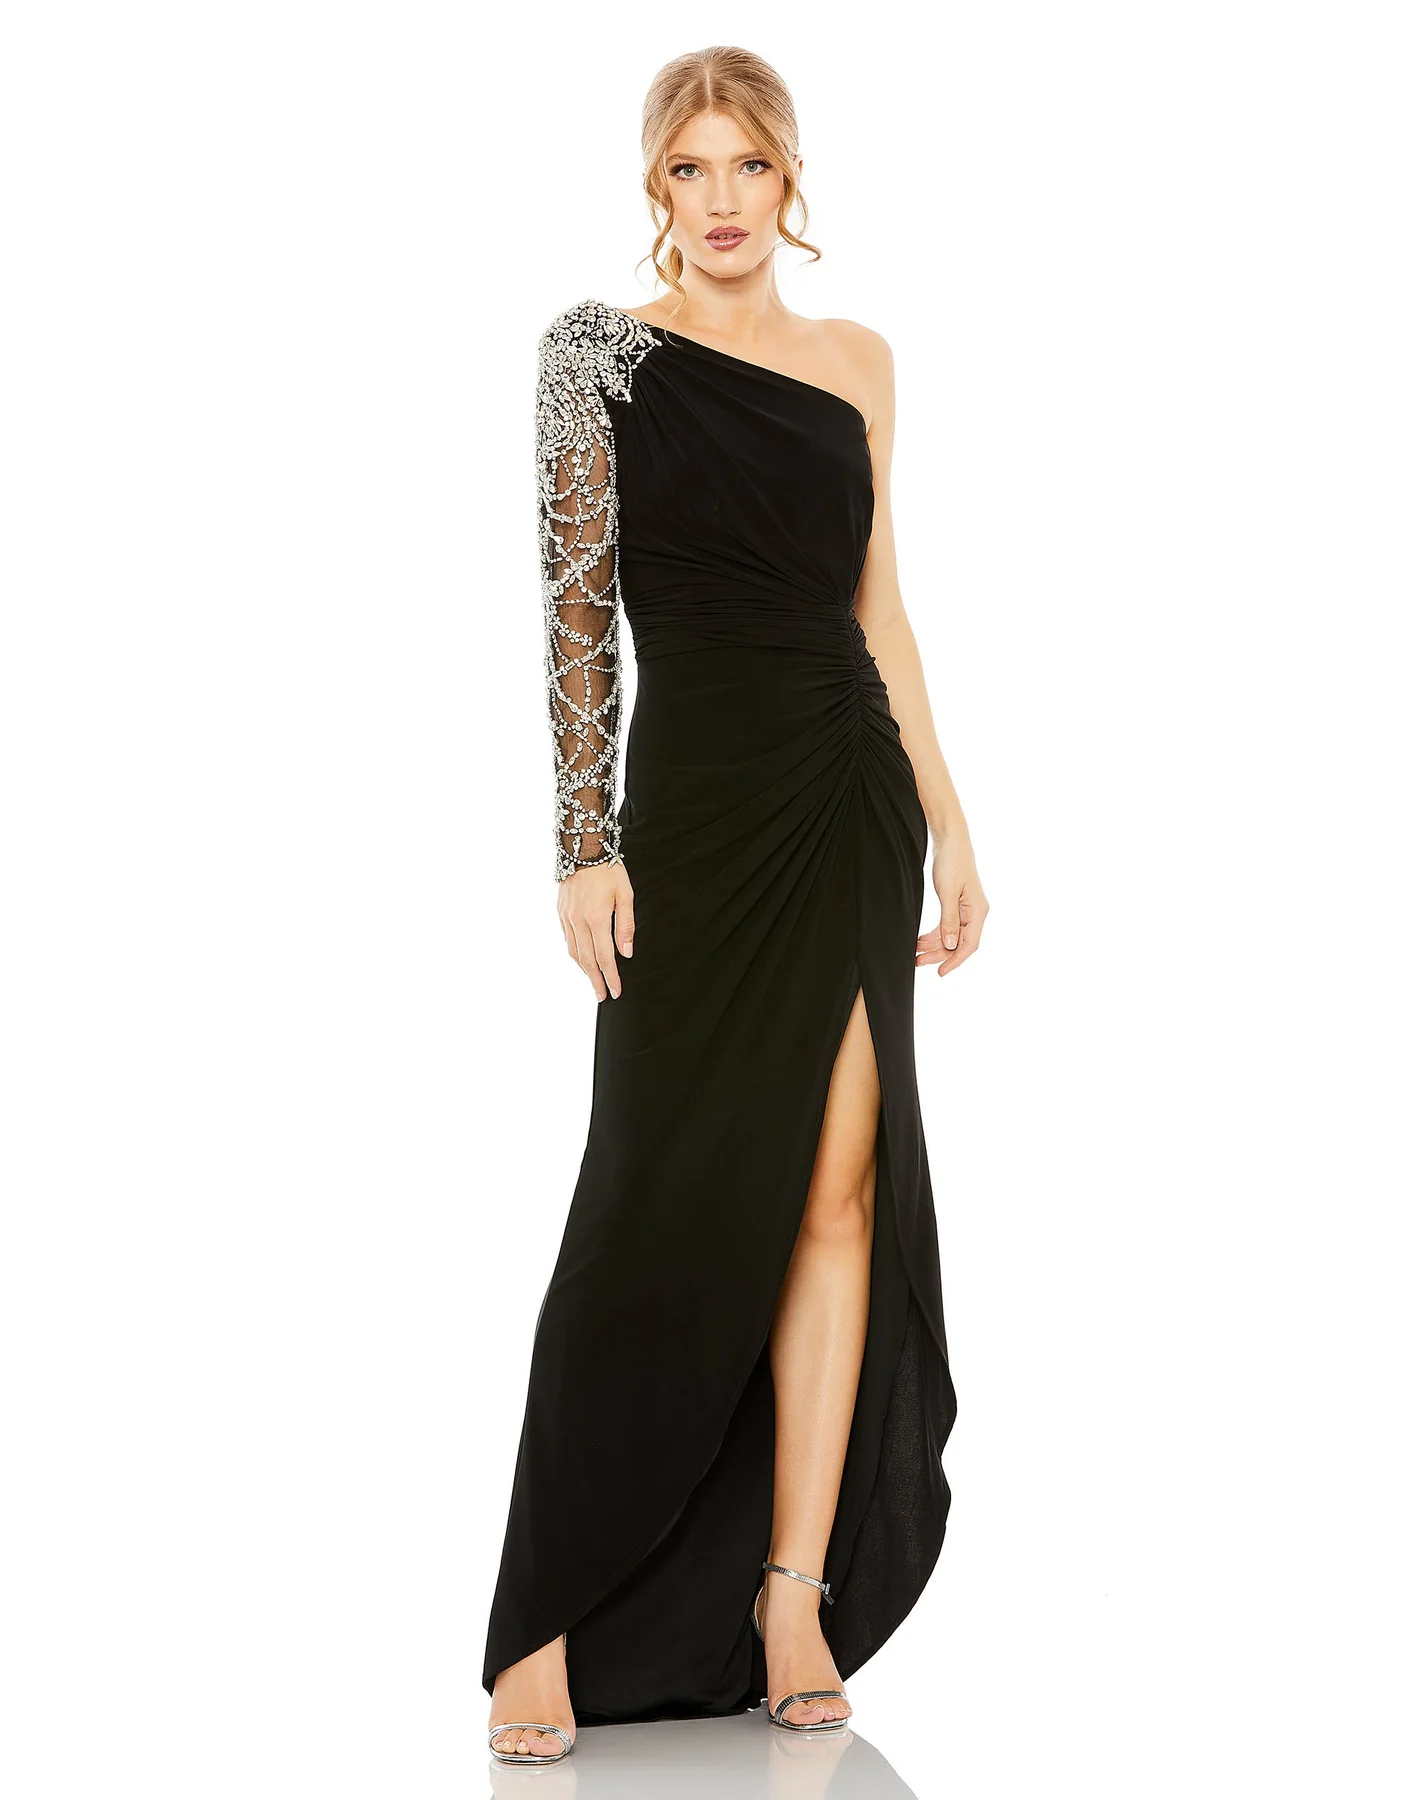 MAC DUGGAL 2215. Authentic dress. NWT. Fastest FREE shipping. Best price ! - $698.00